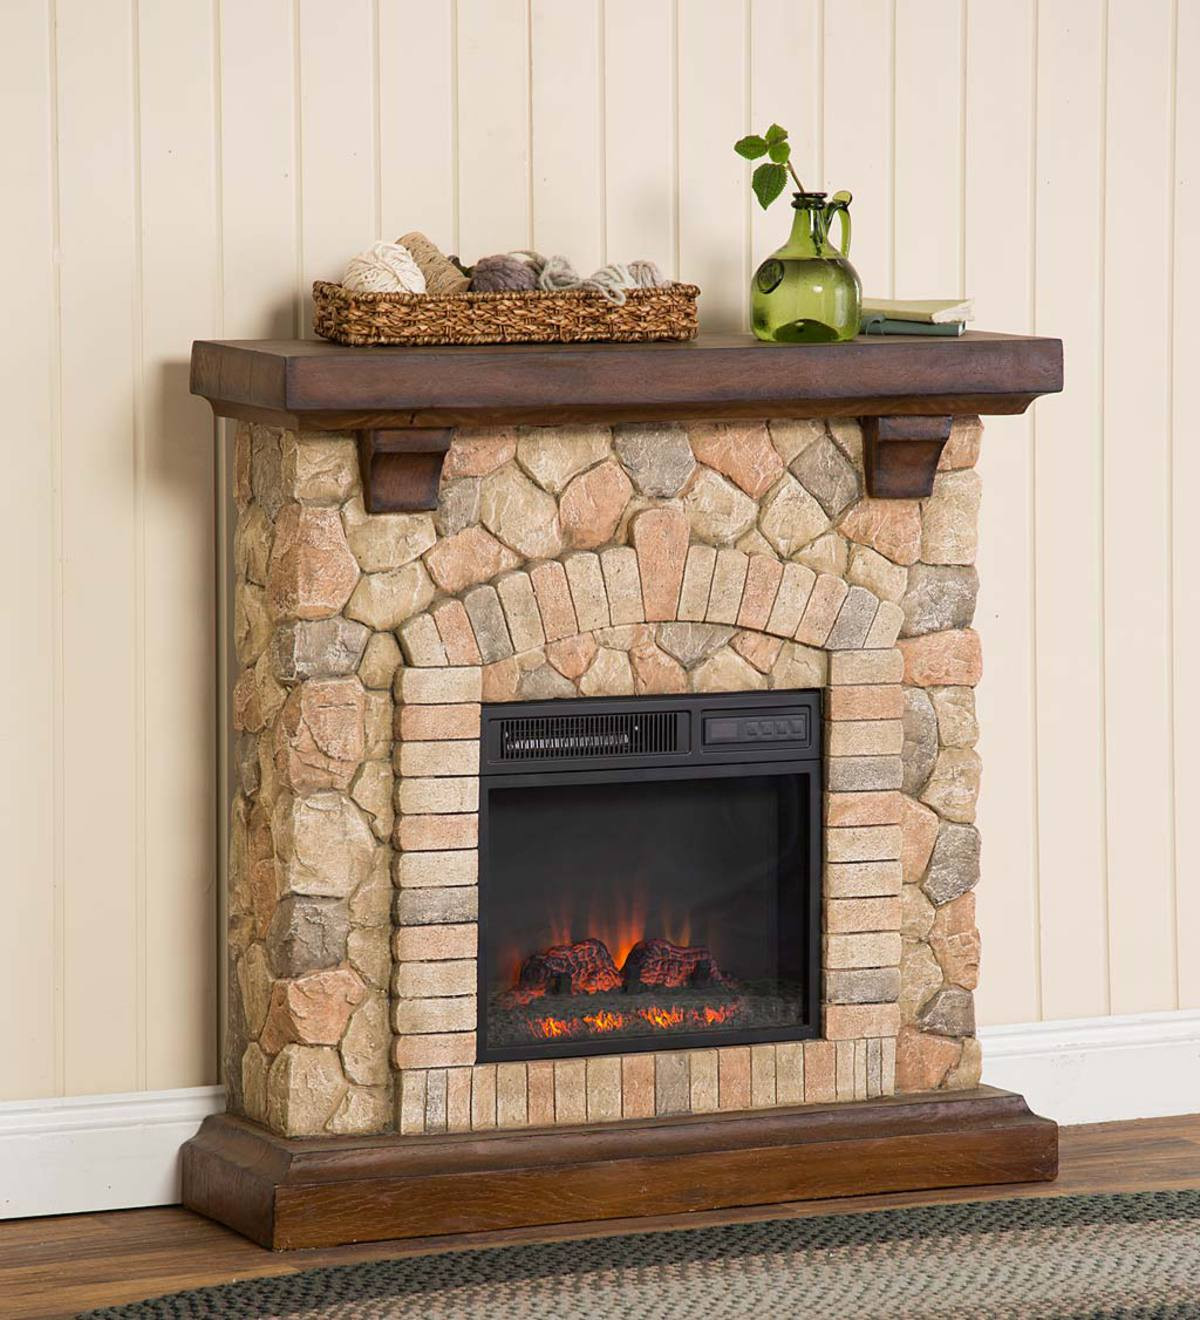 Stone Look Electric Fireplace
 Stacked Stone Electric Quartz Fireplace Heater Ventless